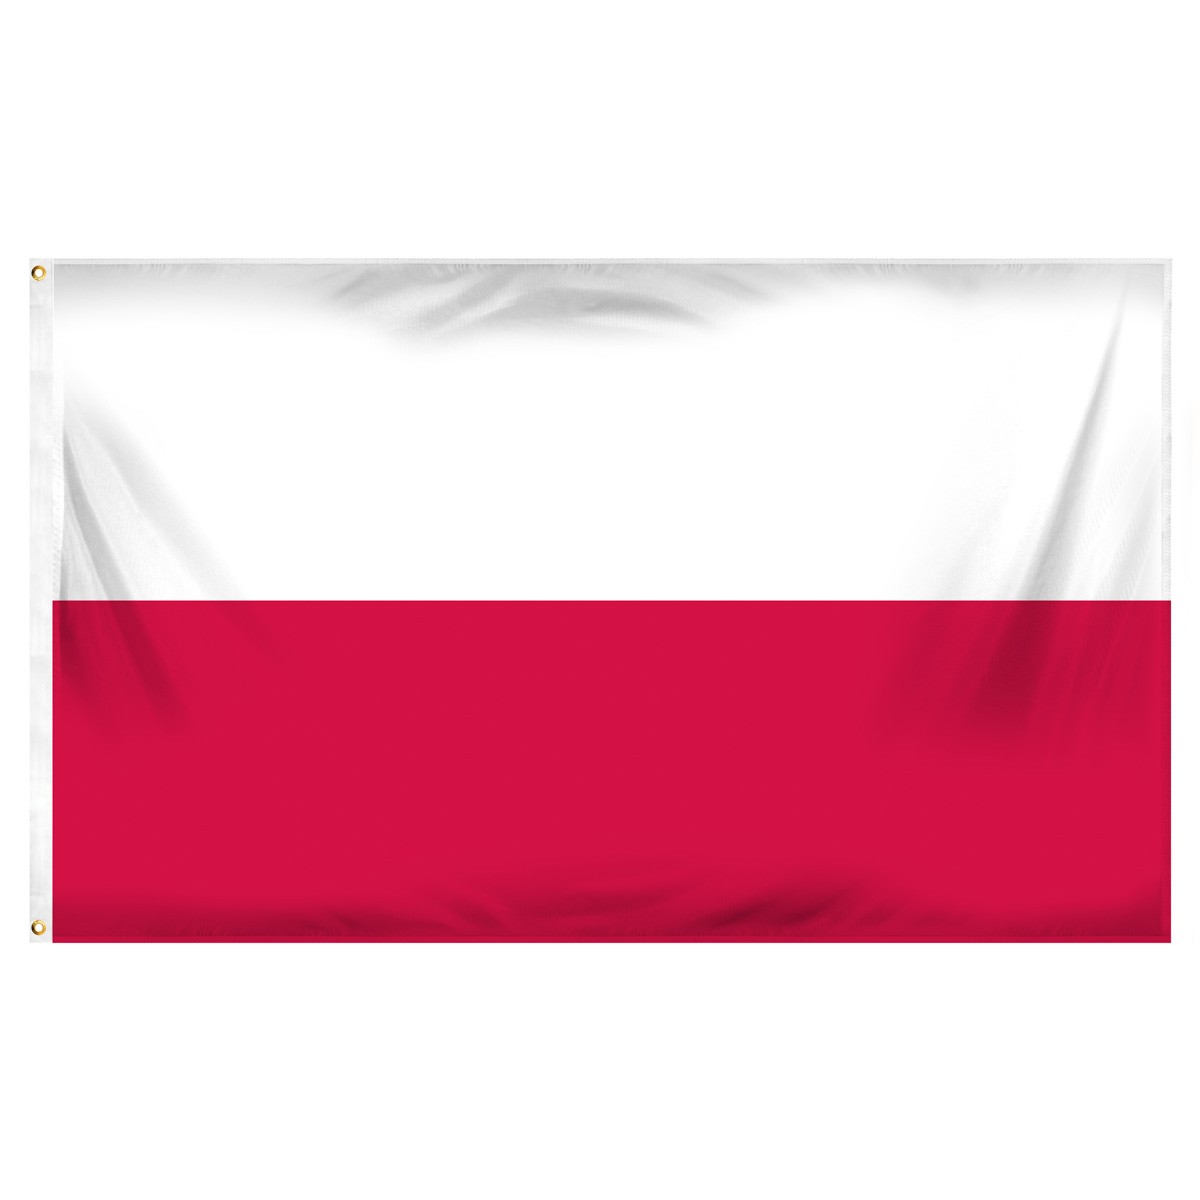 Poland Building Pennants and Flags